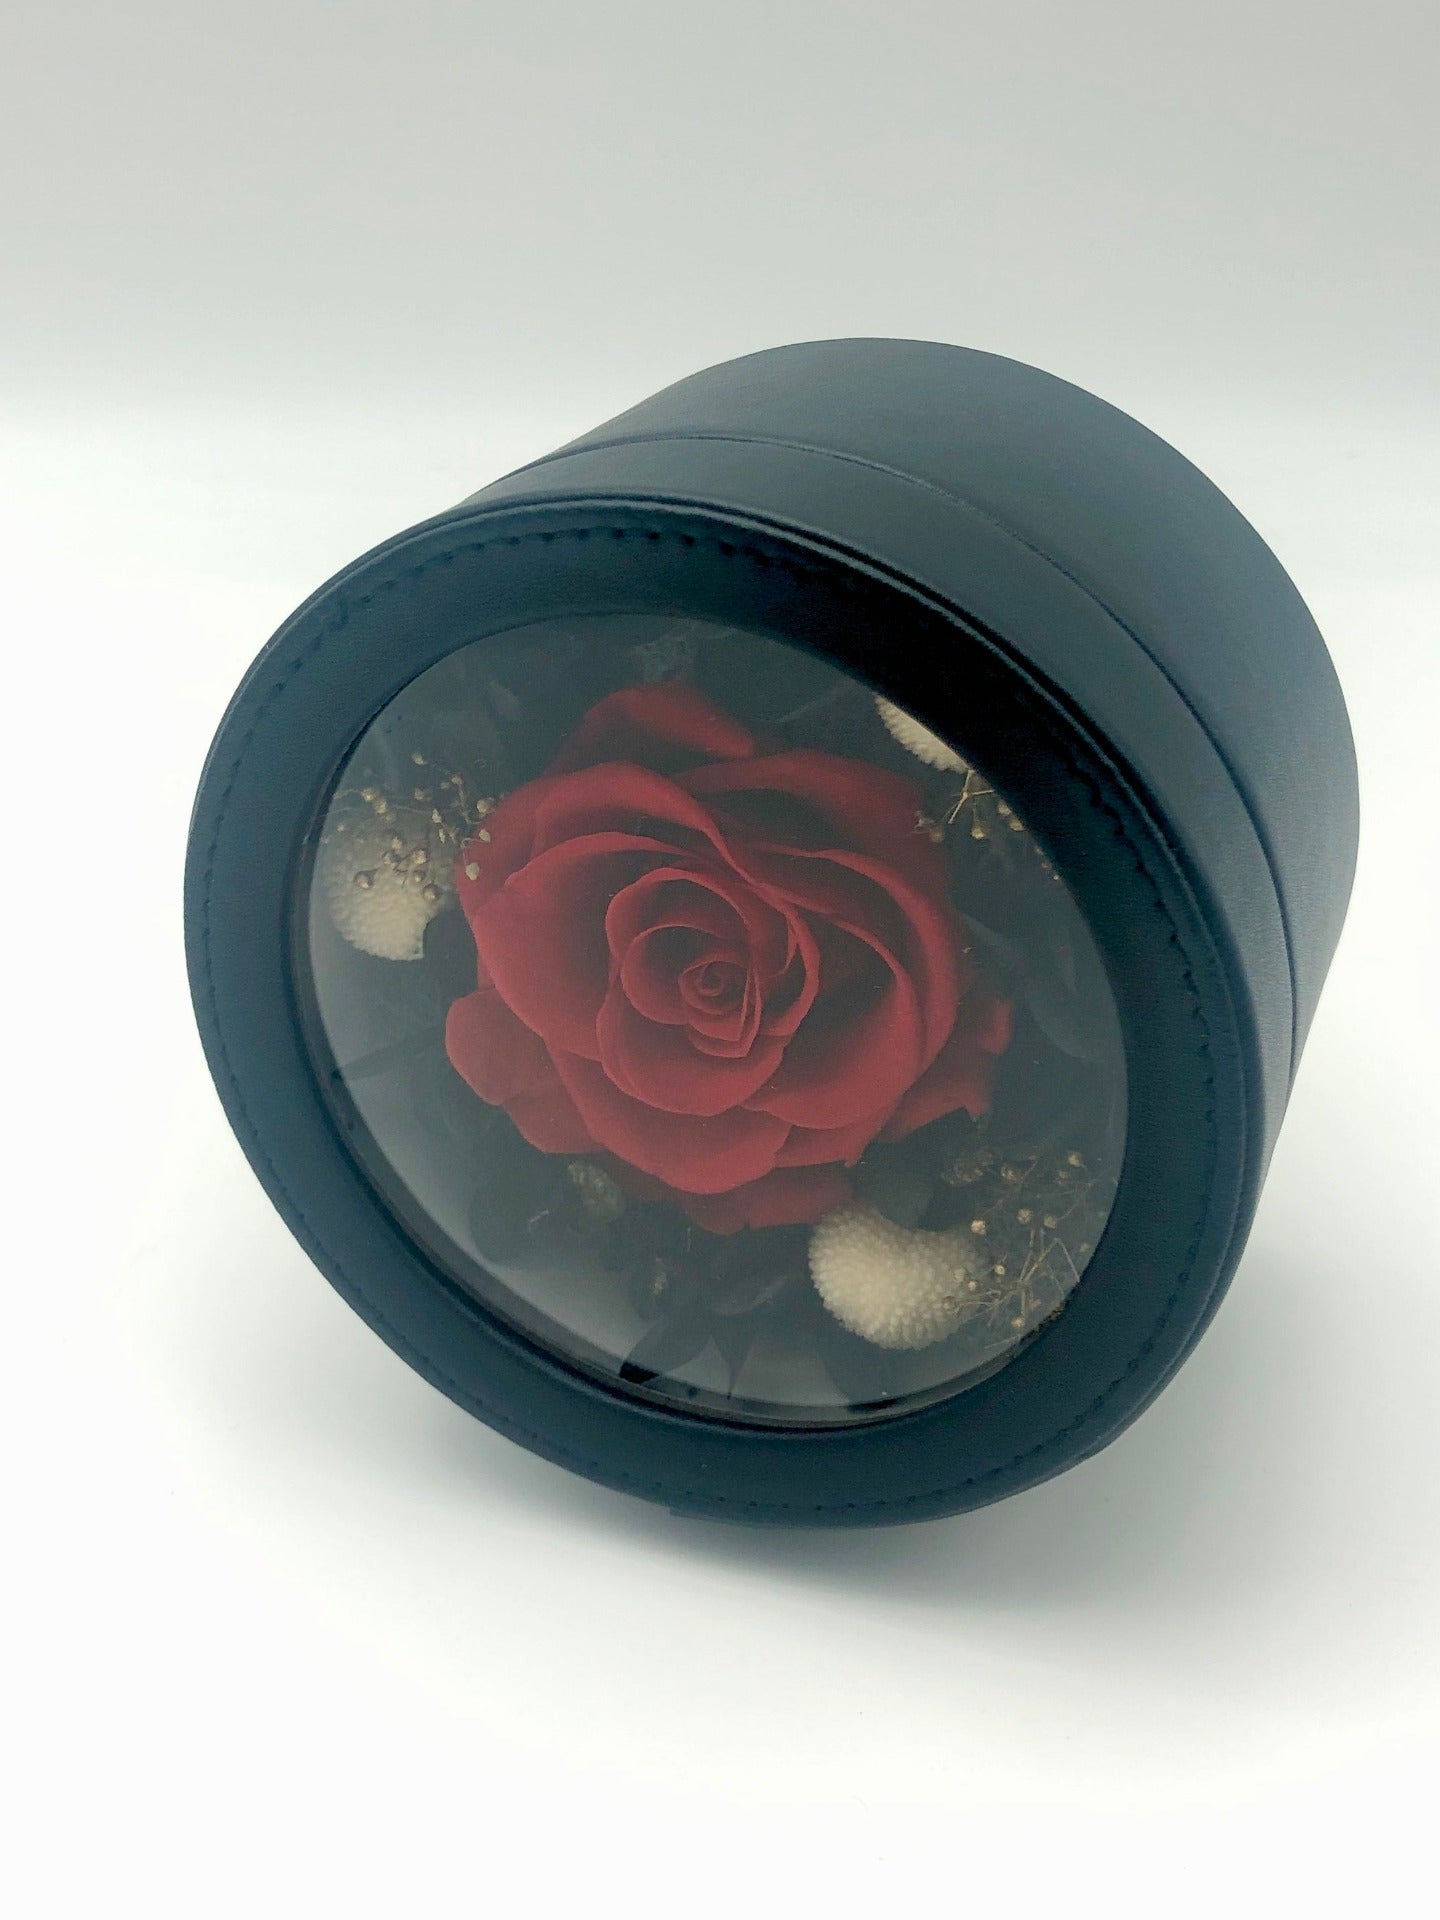 A photo of a stunning preserved red rose, all beautifully presented in a black gift box with a clear lid. A perfect gift for any special occasion.